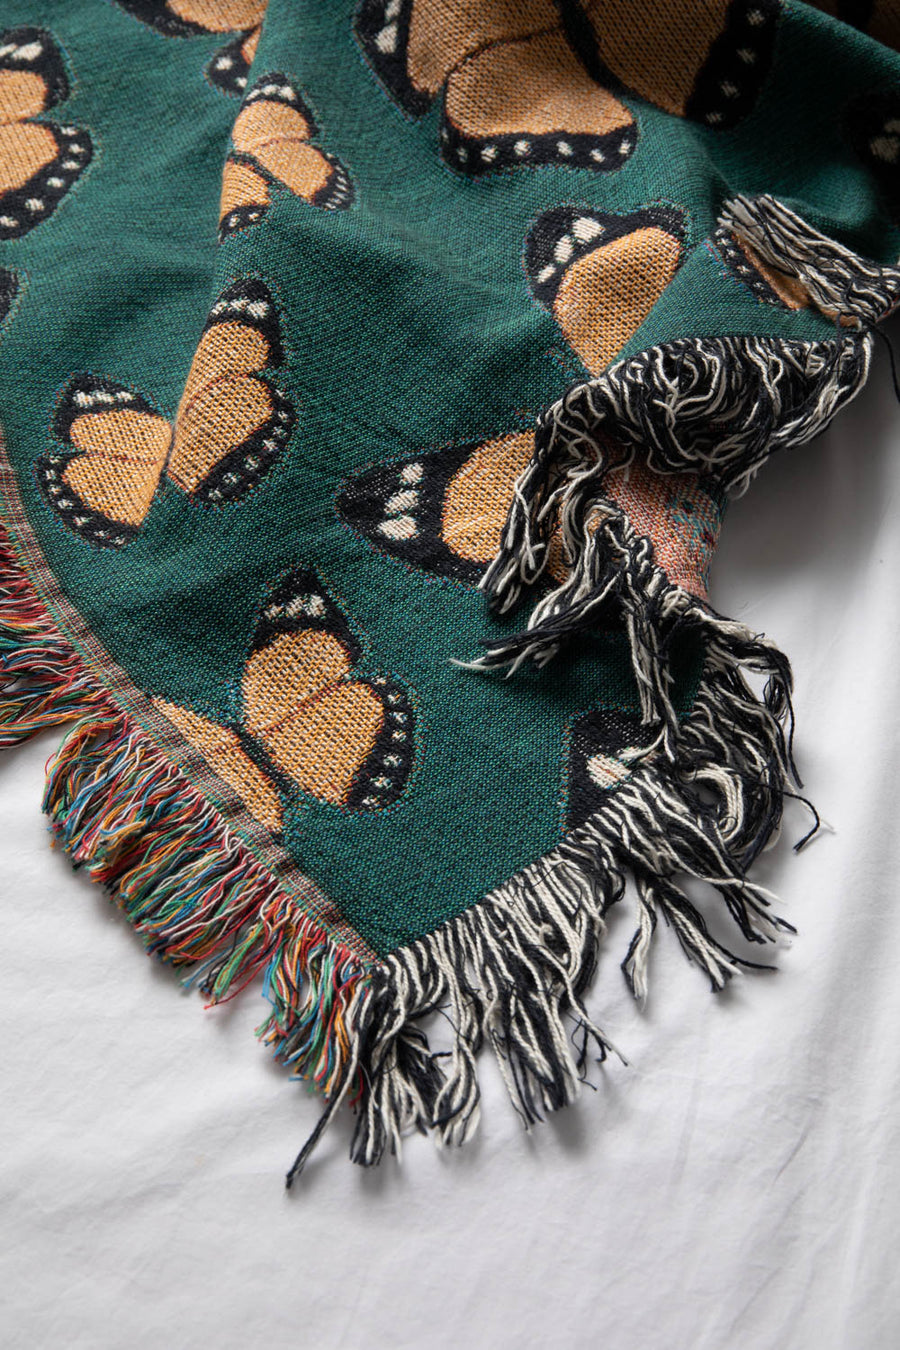 Monarch Butterfly Throw Blanket